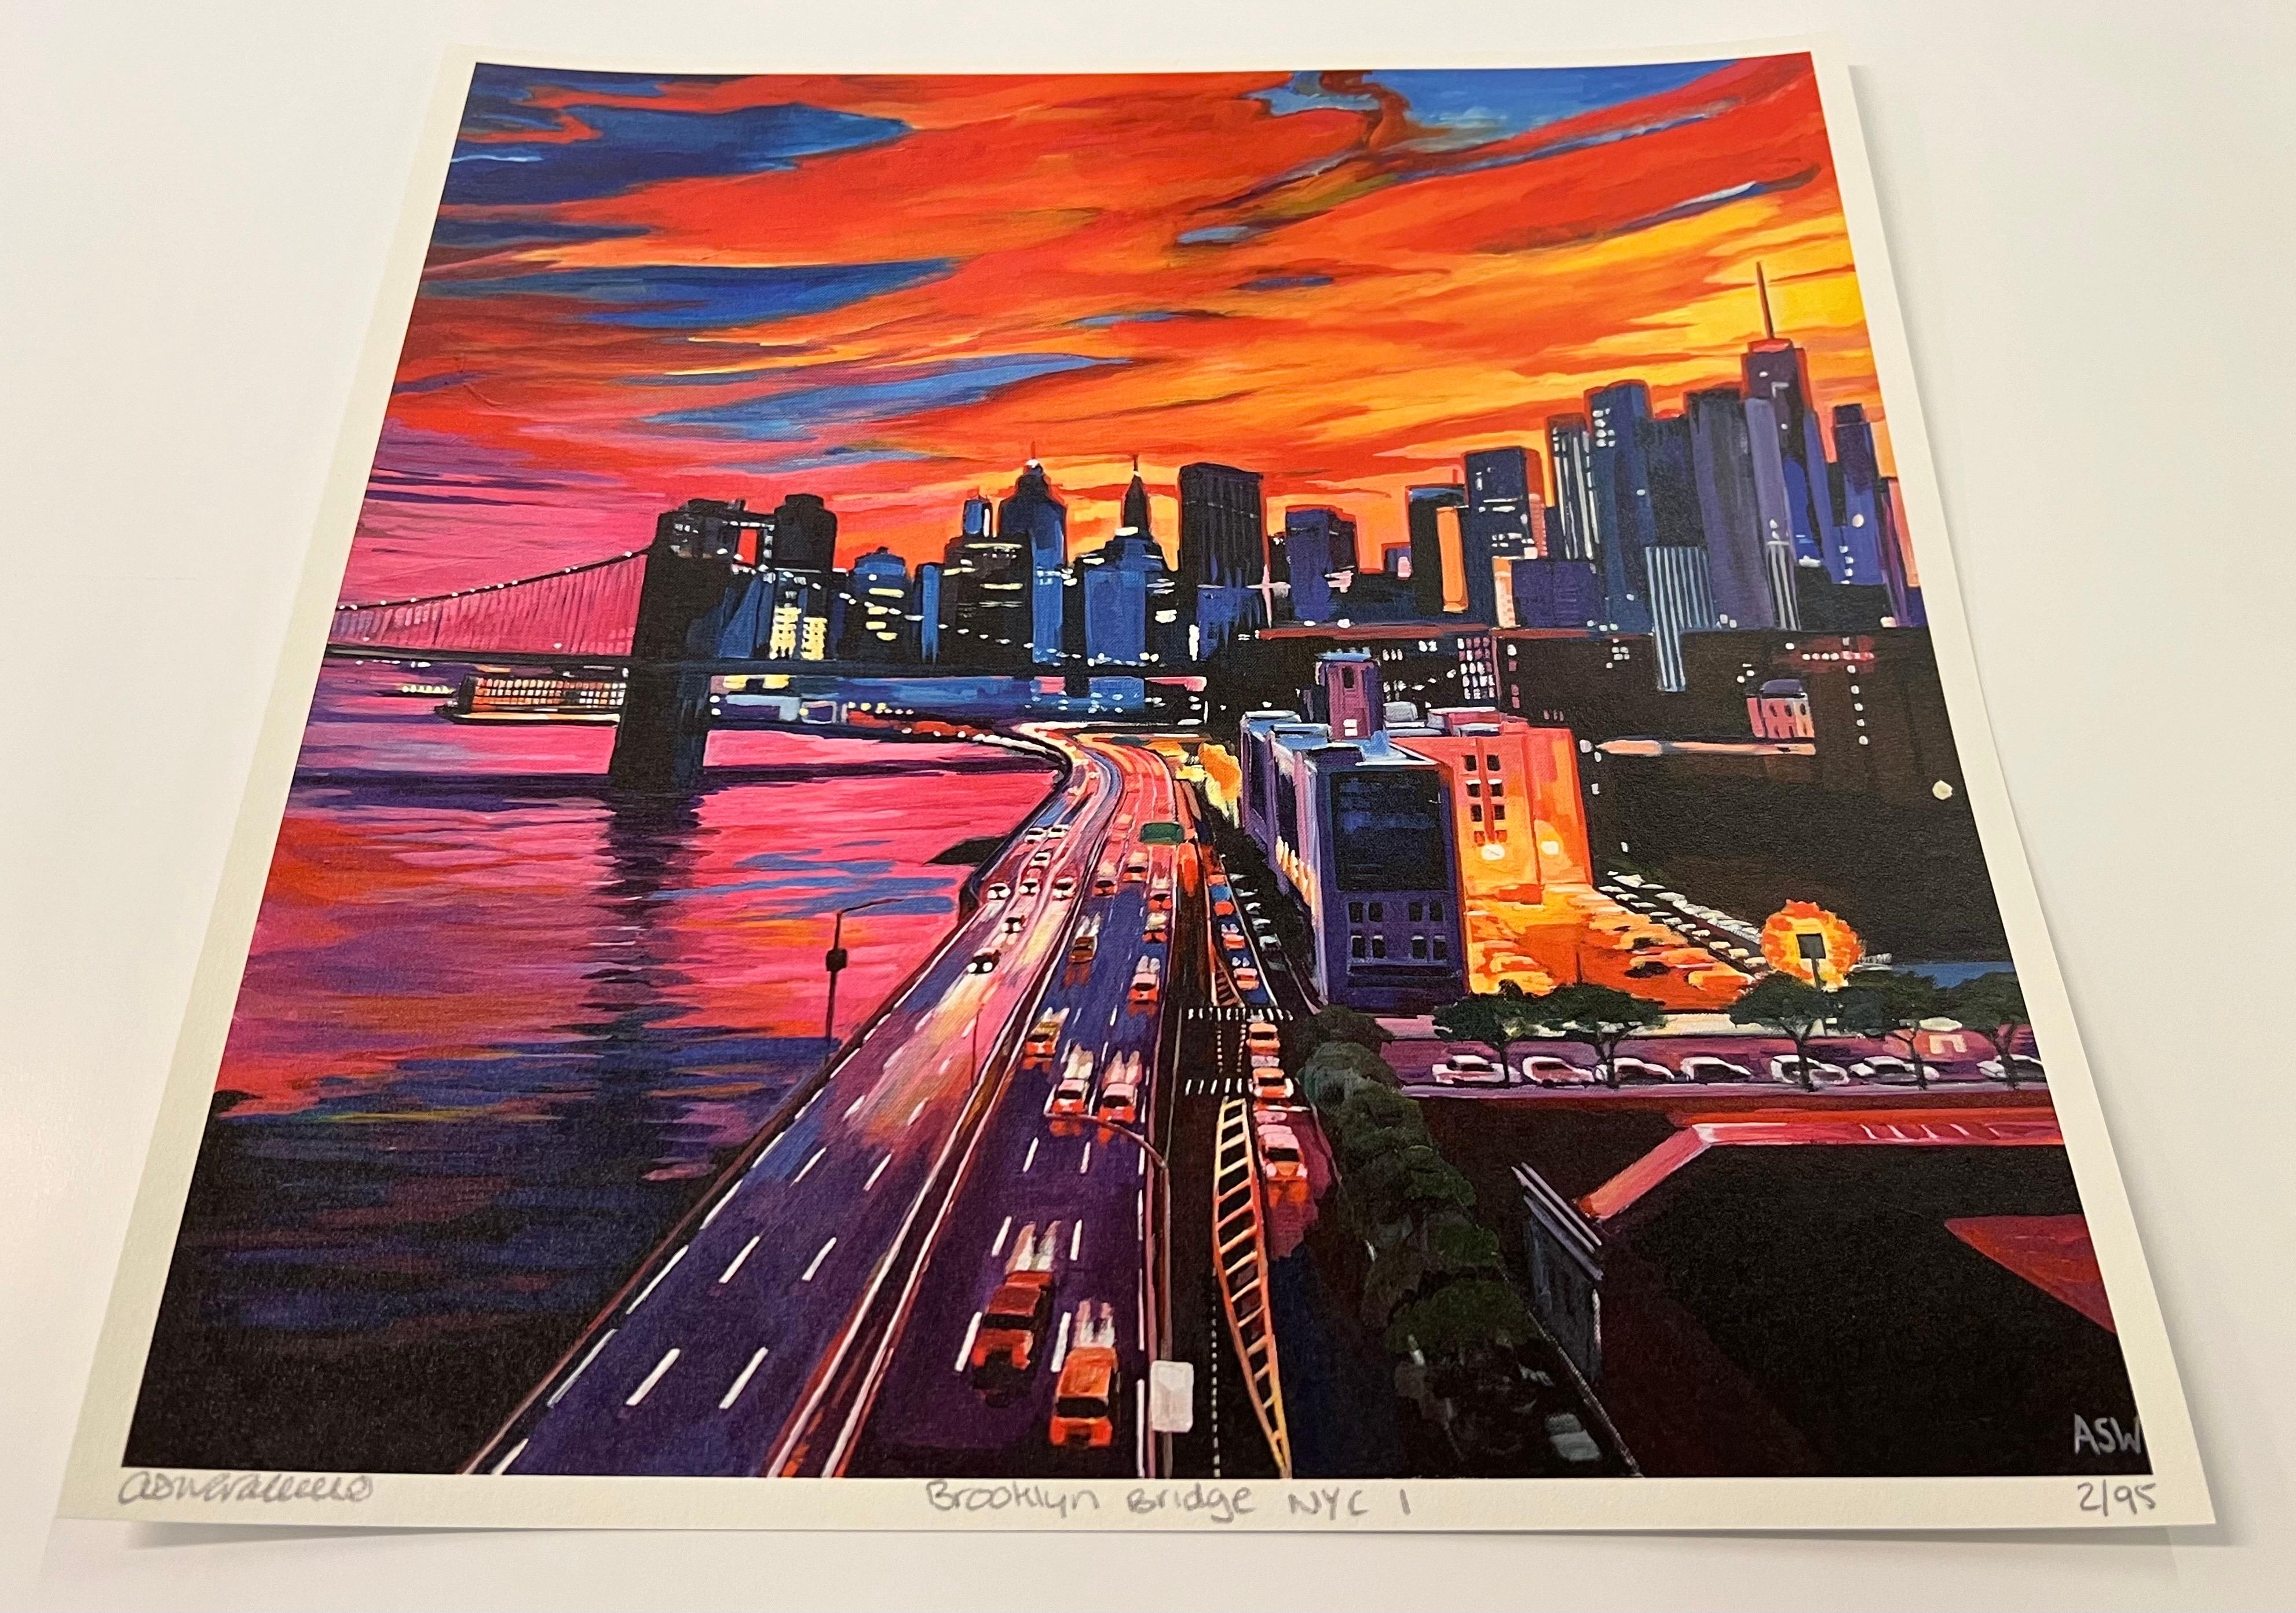 Limited Edition Print of Brooklyn Bridge New York City NYC Skyline United States of America. This painting captures the New York Skyline with Brooklyn Bridge set against the backdrop of a beautiful rich orange and red sunset from a high vantage